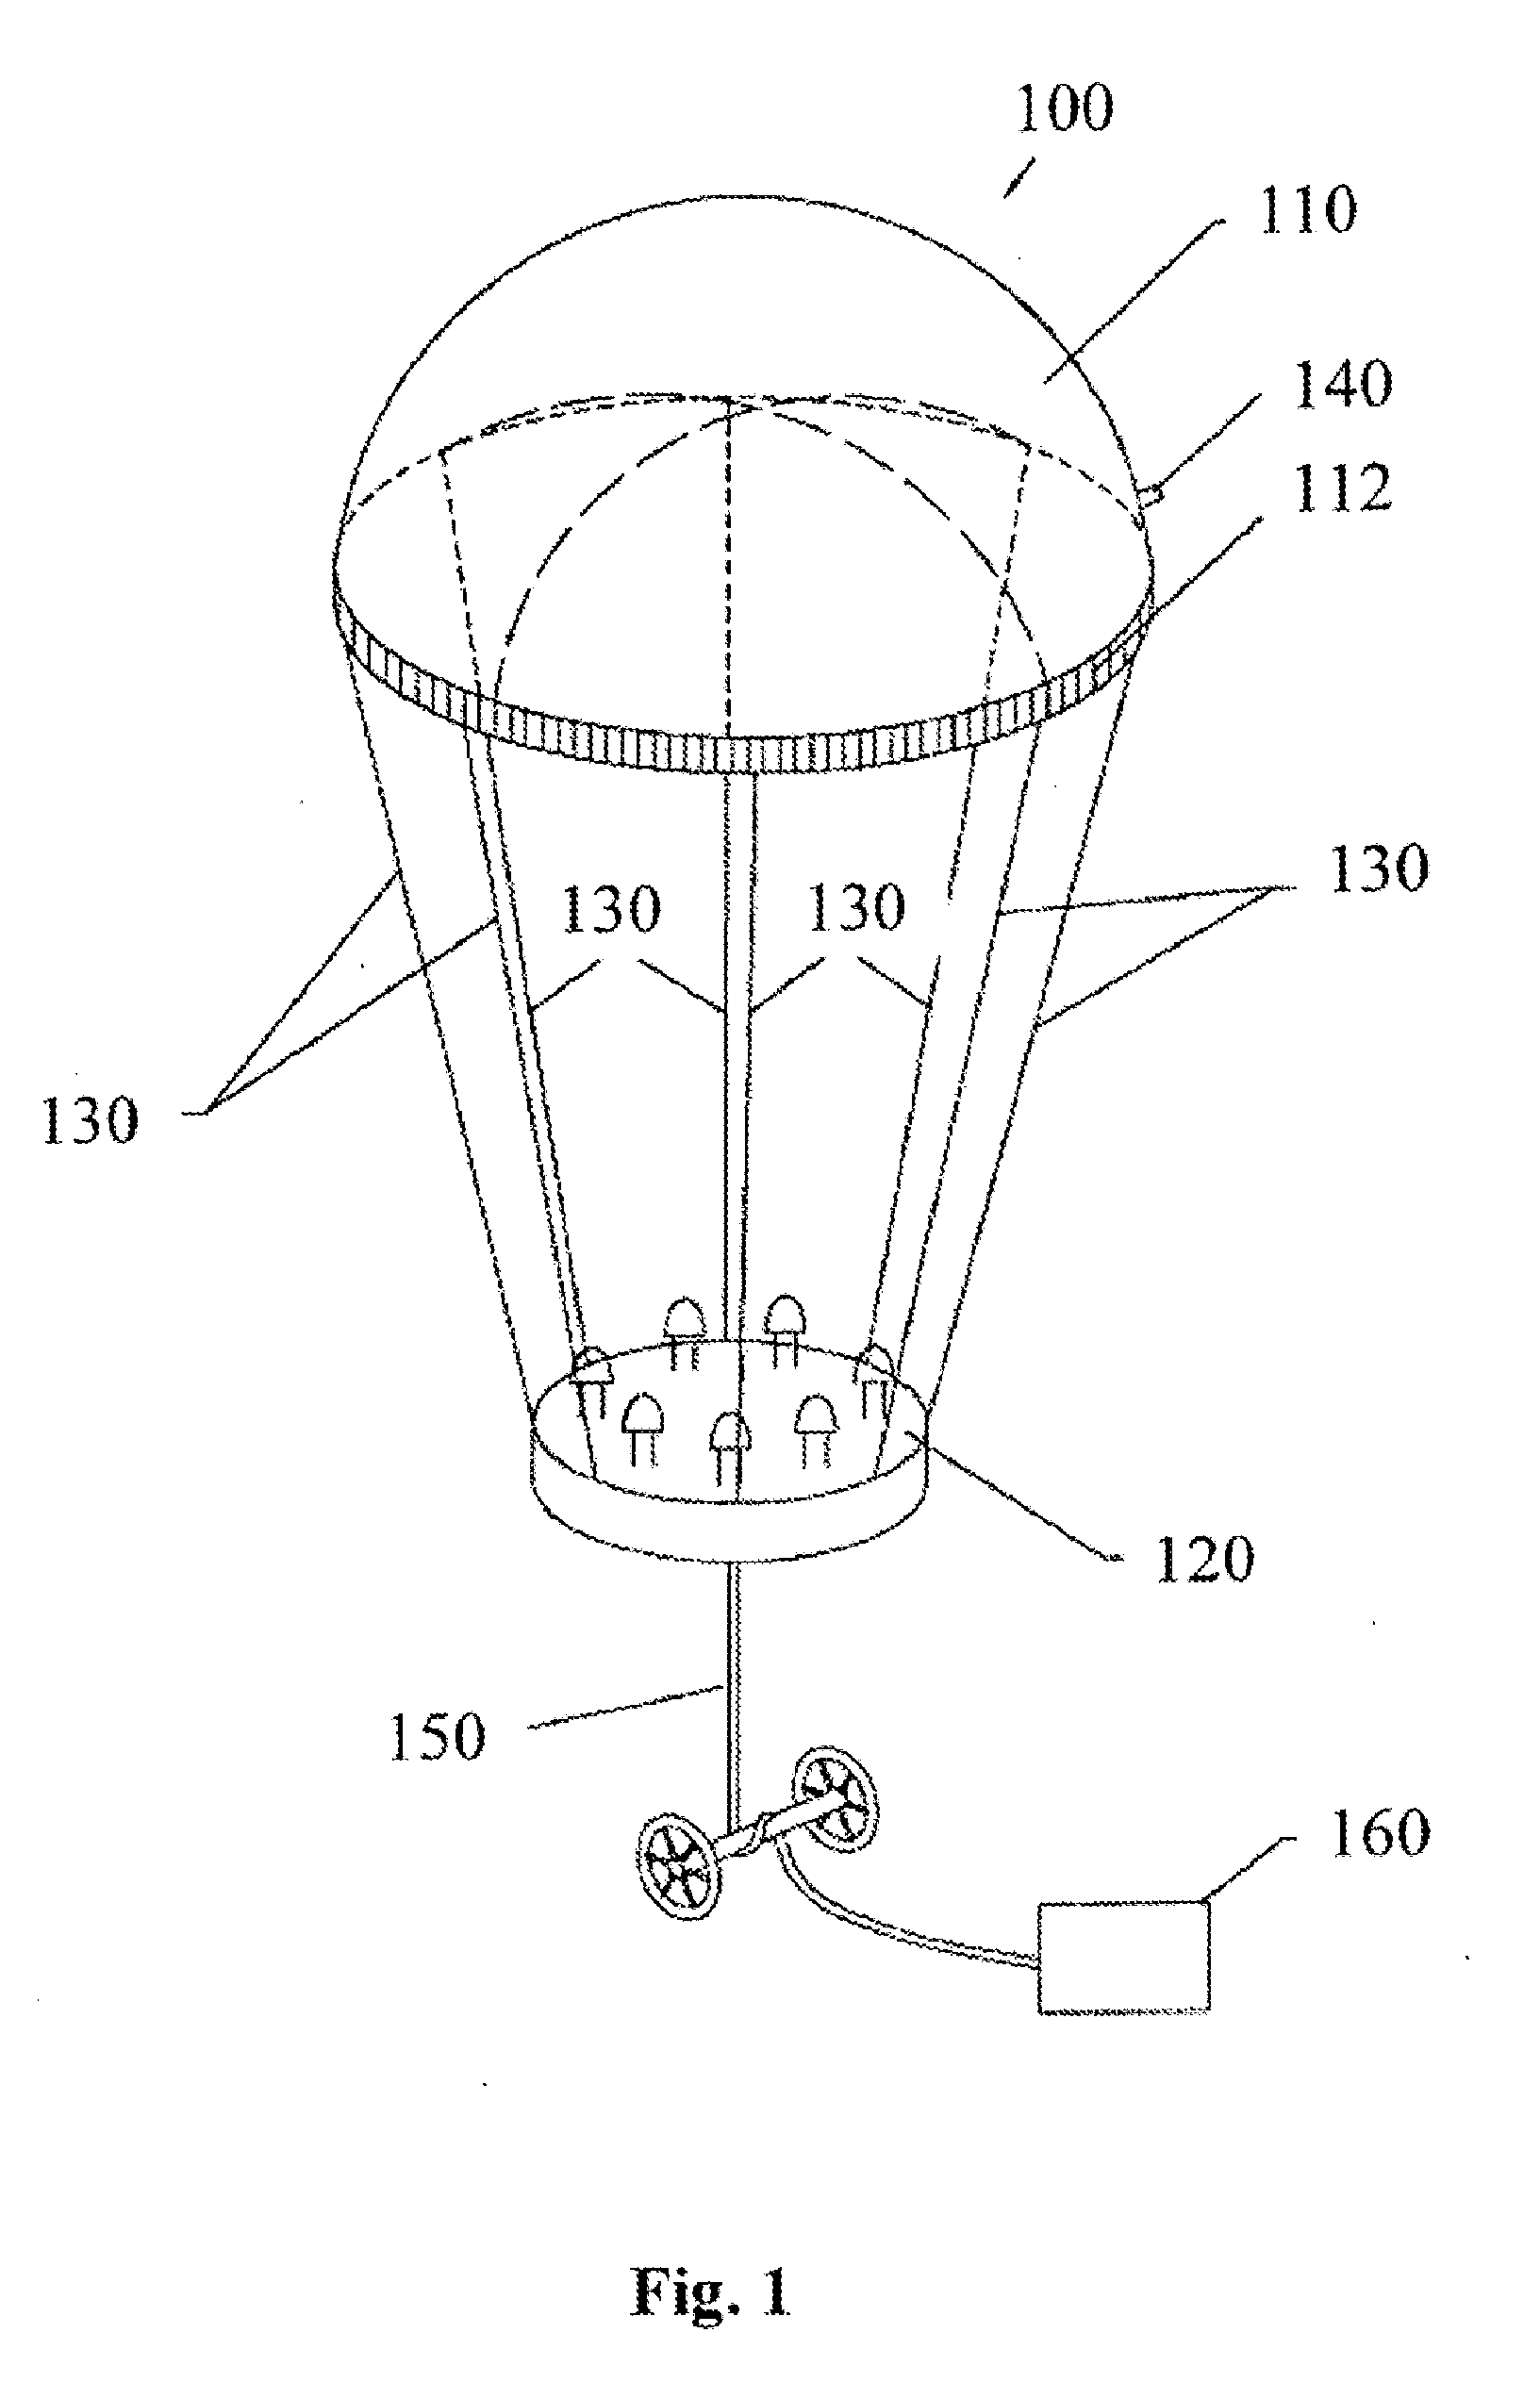 Inflatable Lighting and Display Apparatuses and Systems